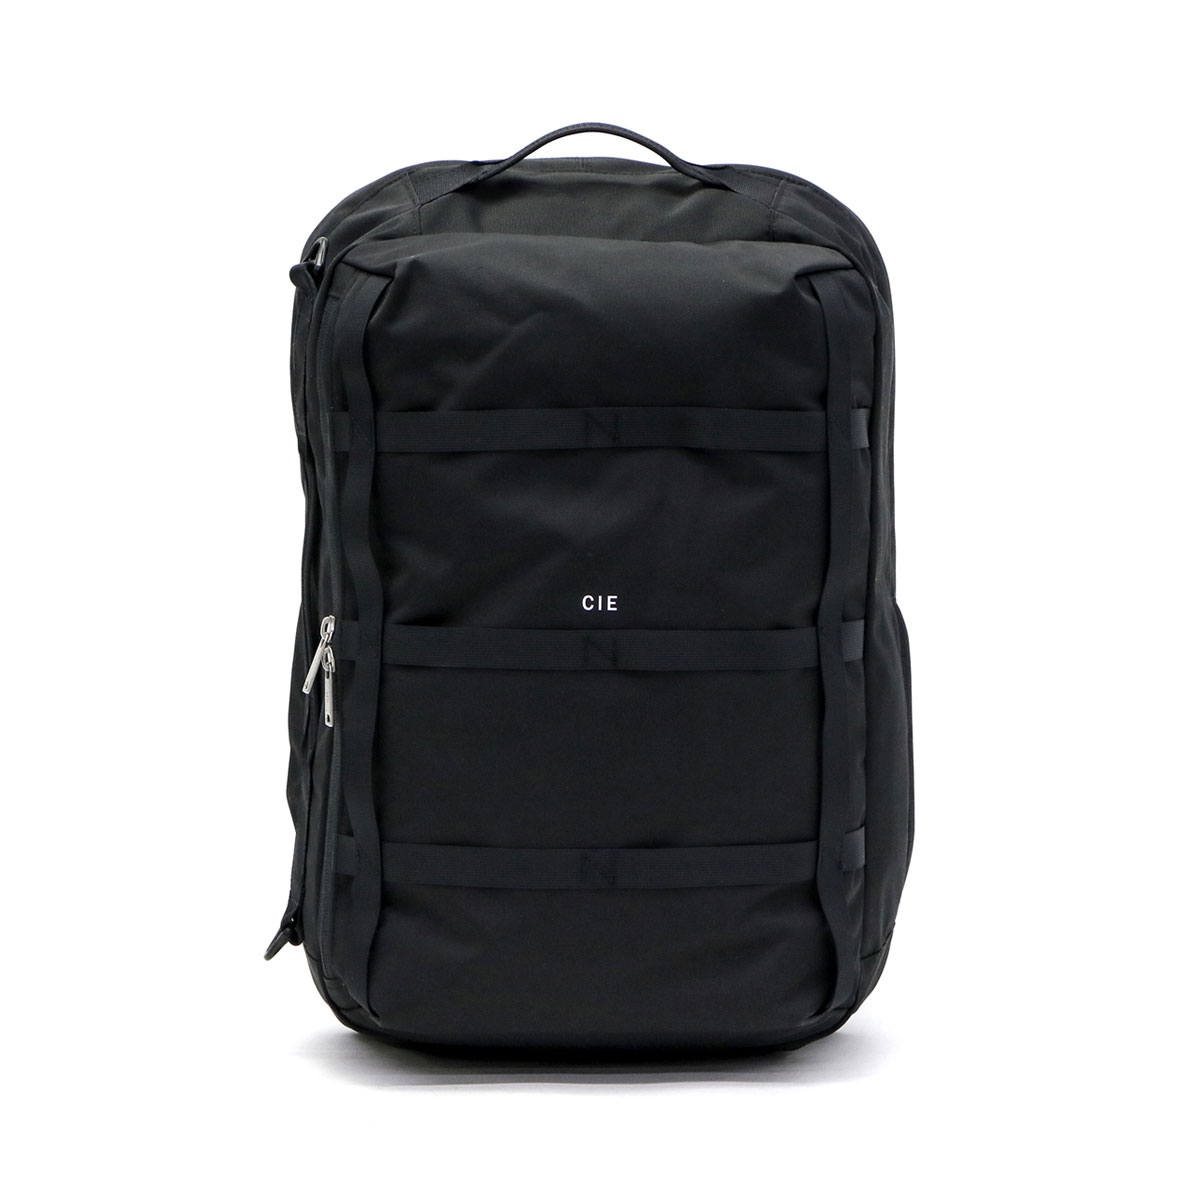 CIE シー GRID-2 2WAY BACKPACK-01 2WAYバックパック 031853｜【正規 